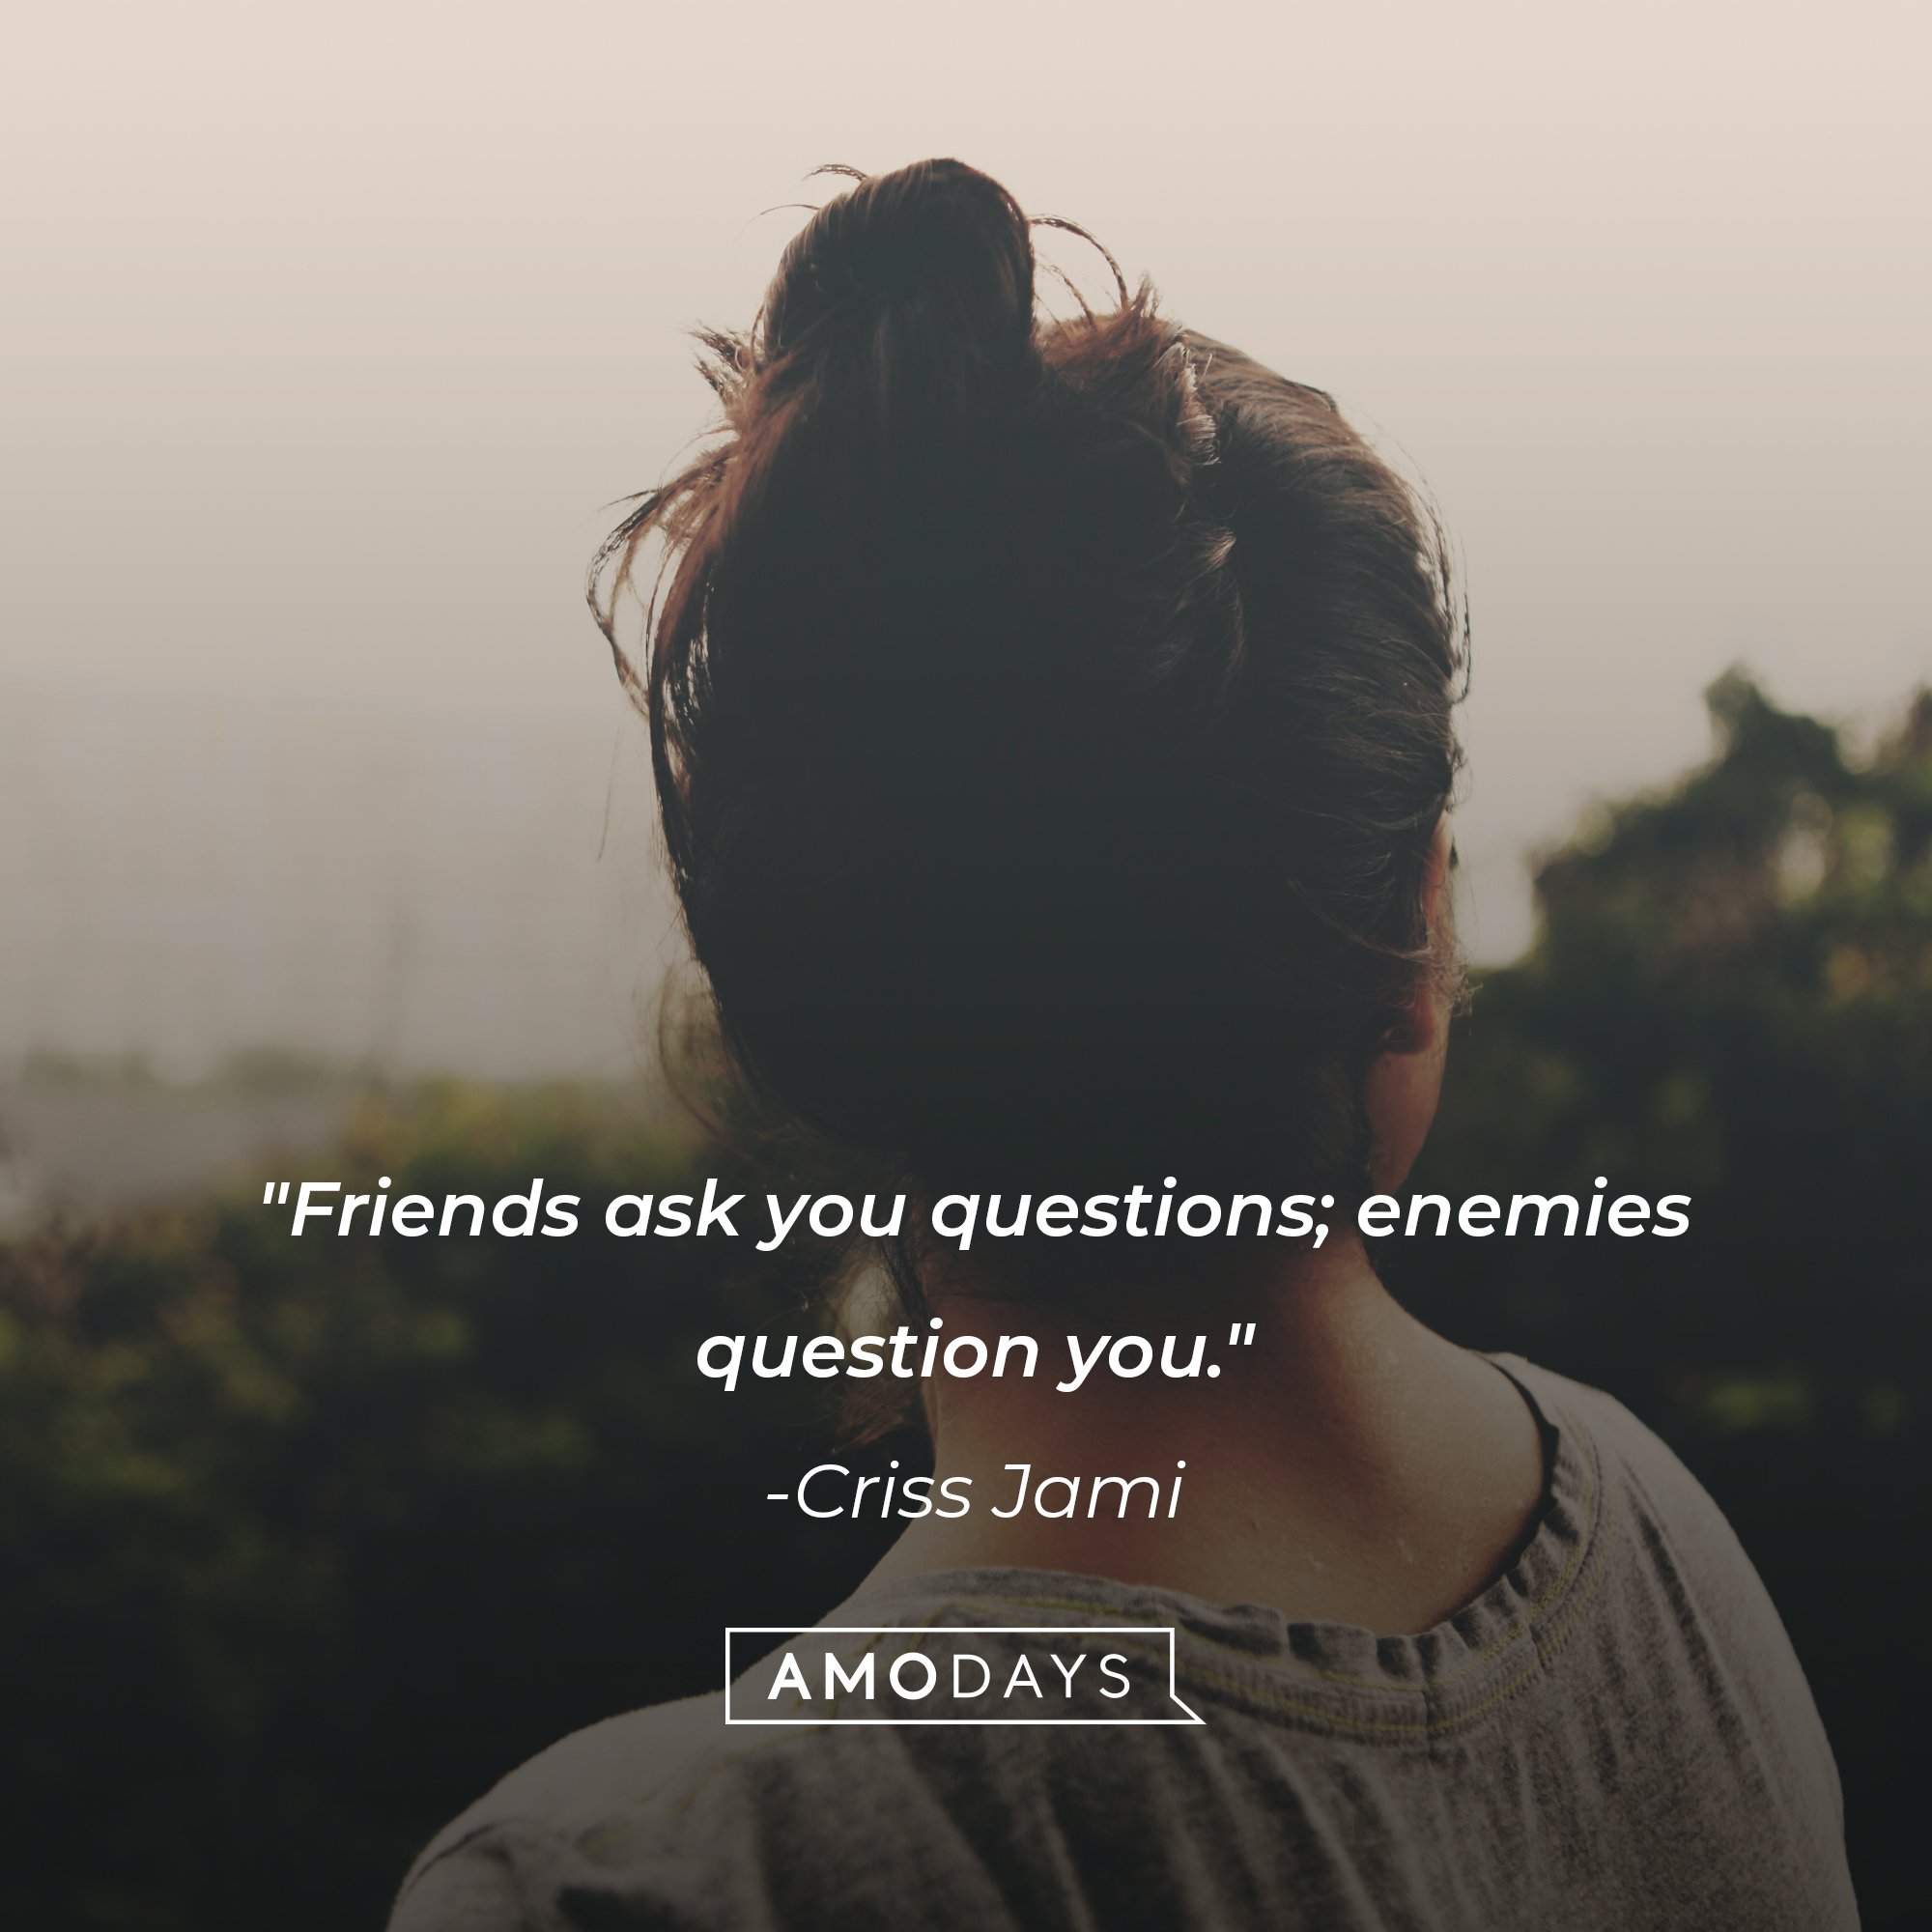 Criss Jami’s quote: "Friends ask you questions; enemies question you." | Image: AmoDays 